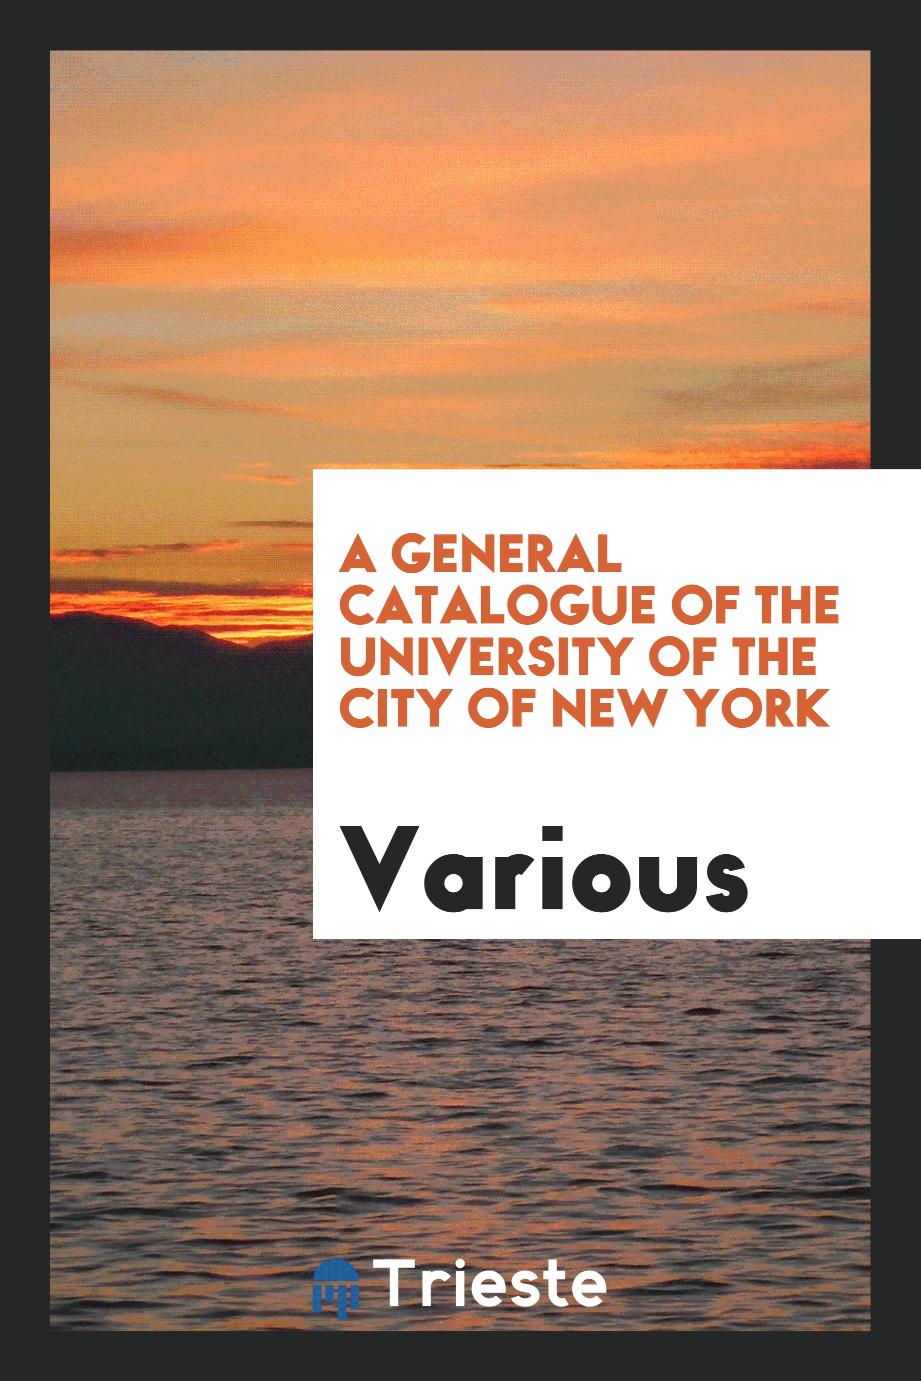 A general catalogue of the University of the city of New York